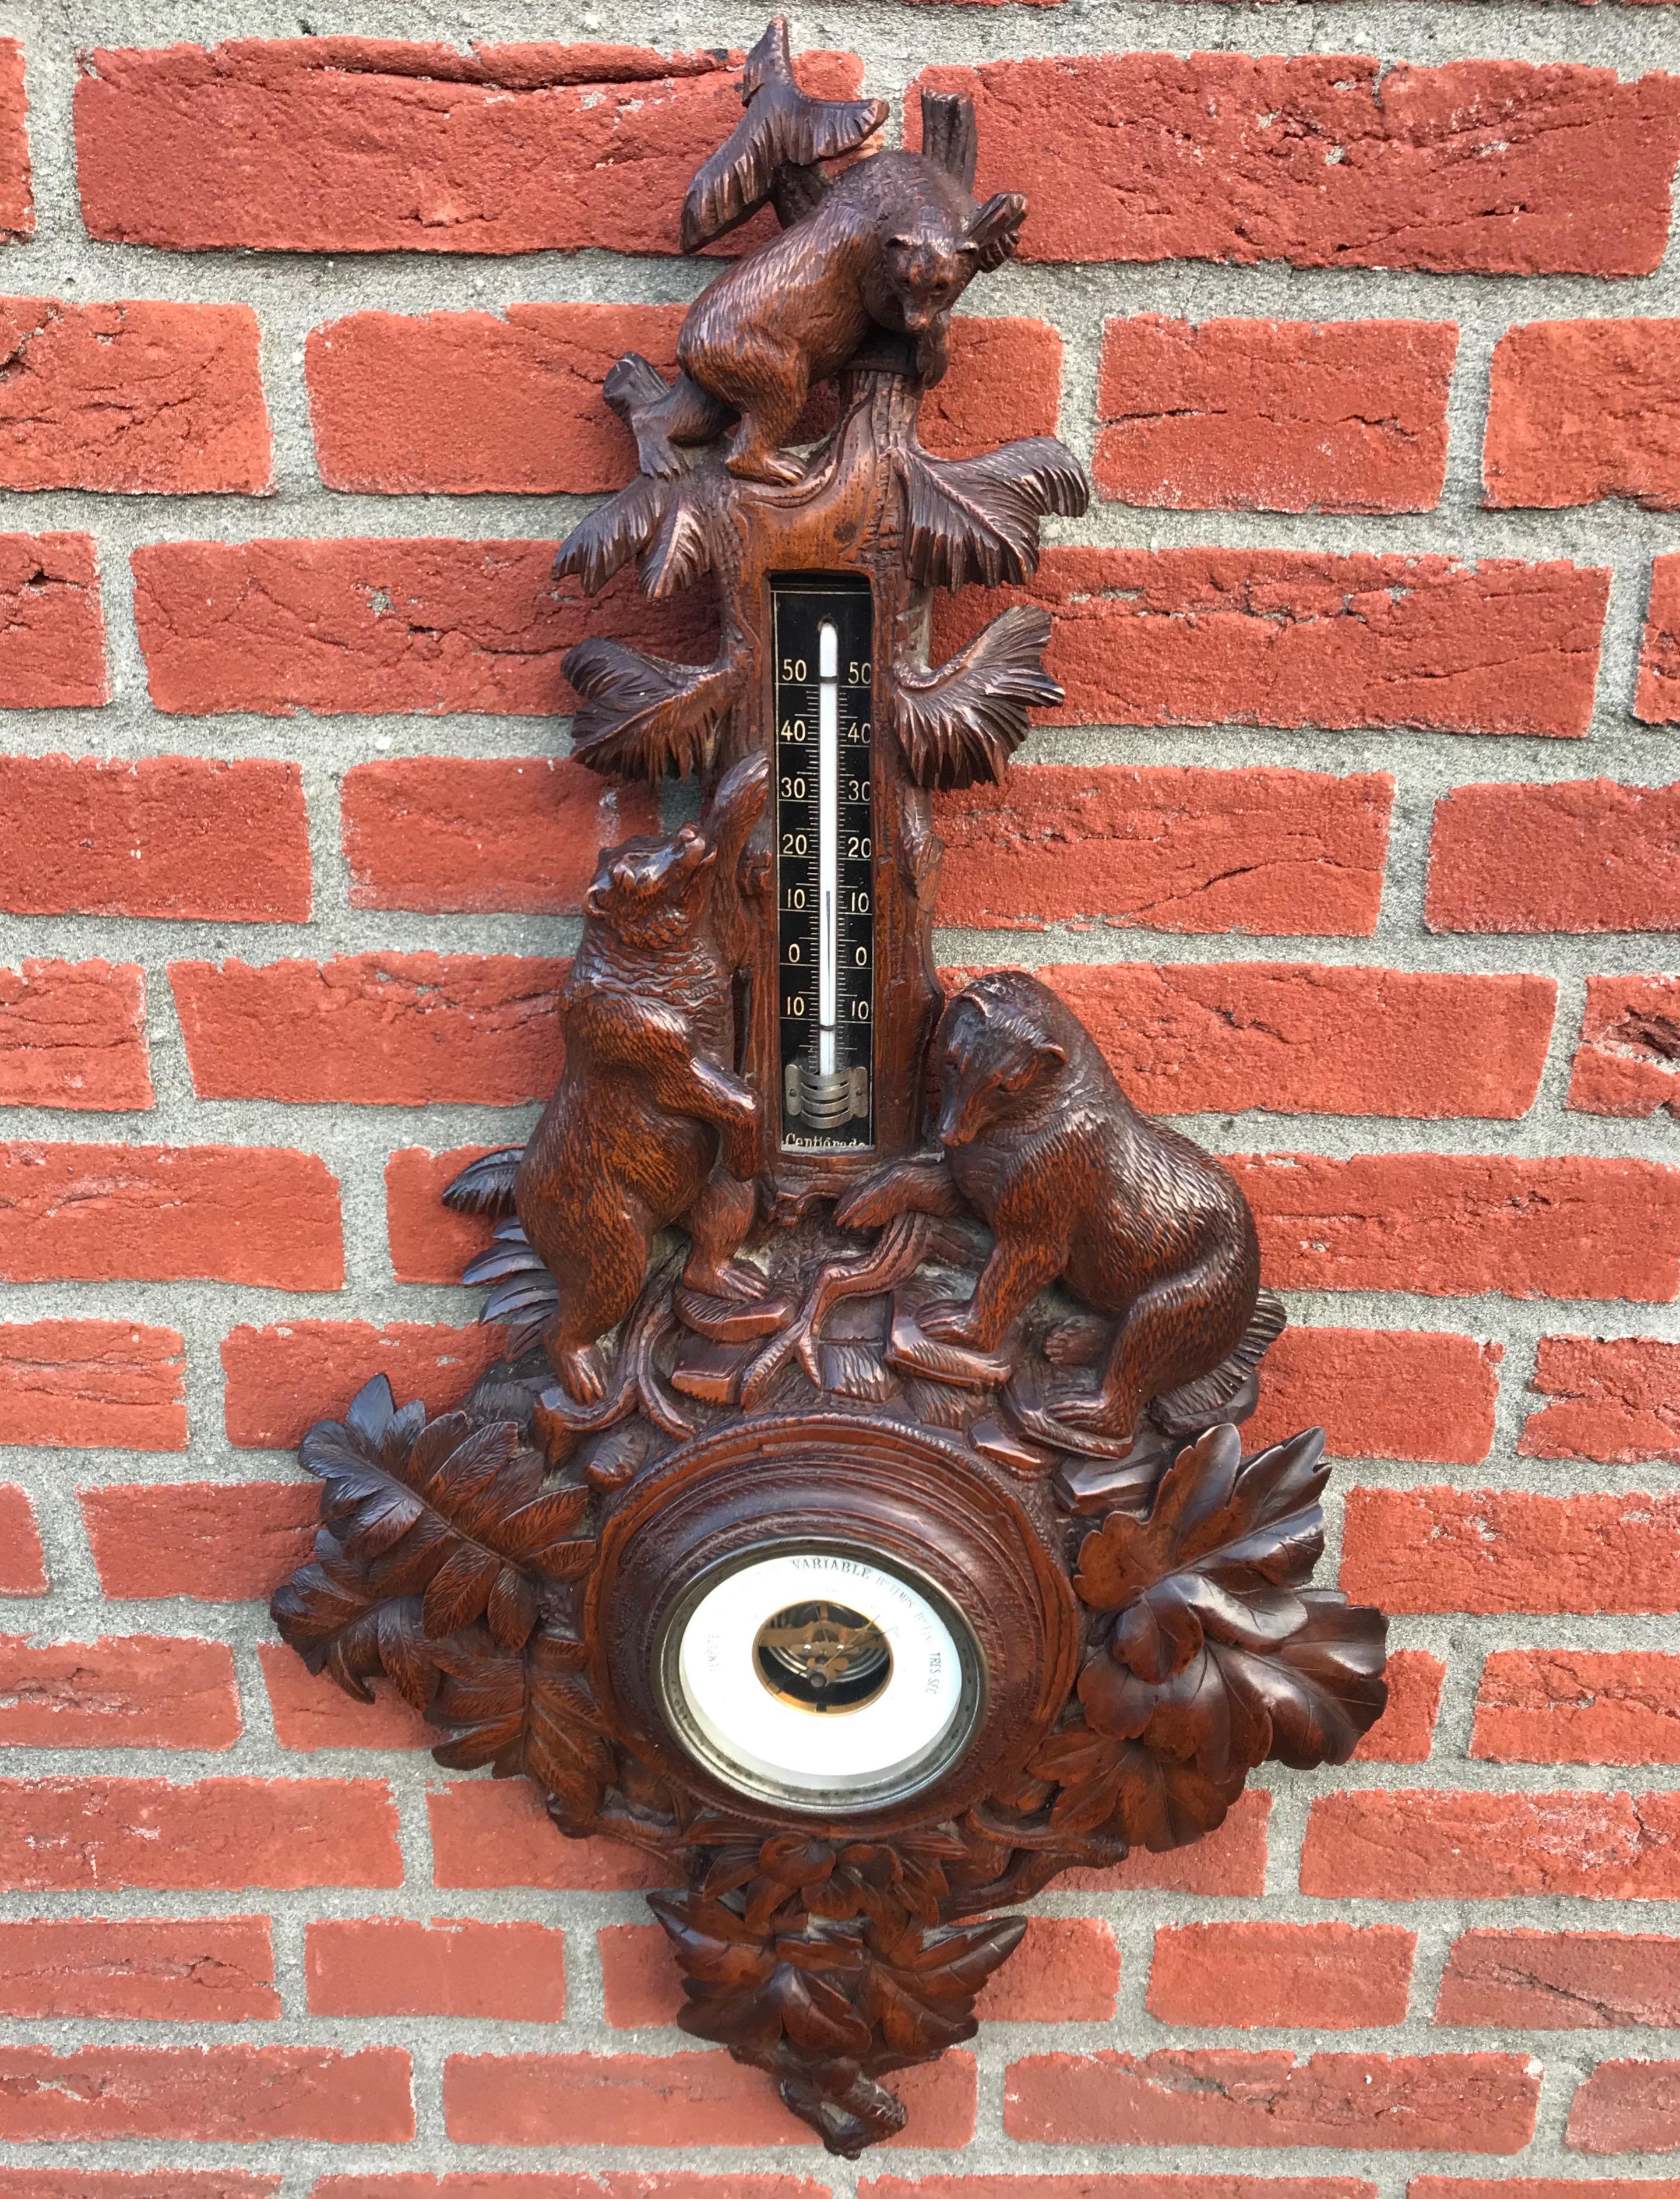 Top quality hand carved, antique barometer.

This rare Black Forest barometer depicting a family of three bears climbing a tree is incredibly well carved and it has the most beautiful patina. It looks like junior had no problem climbing to the top